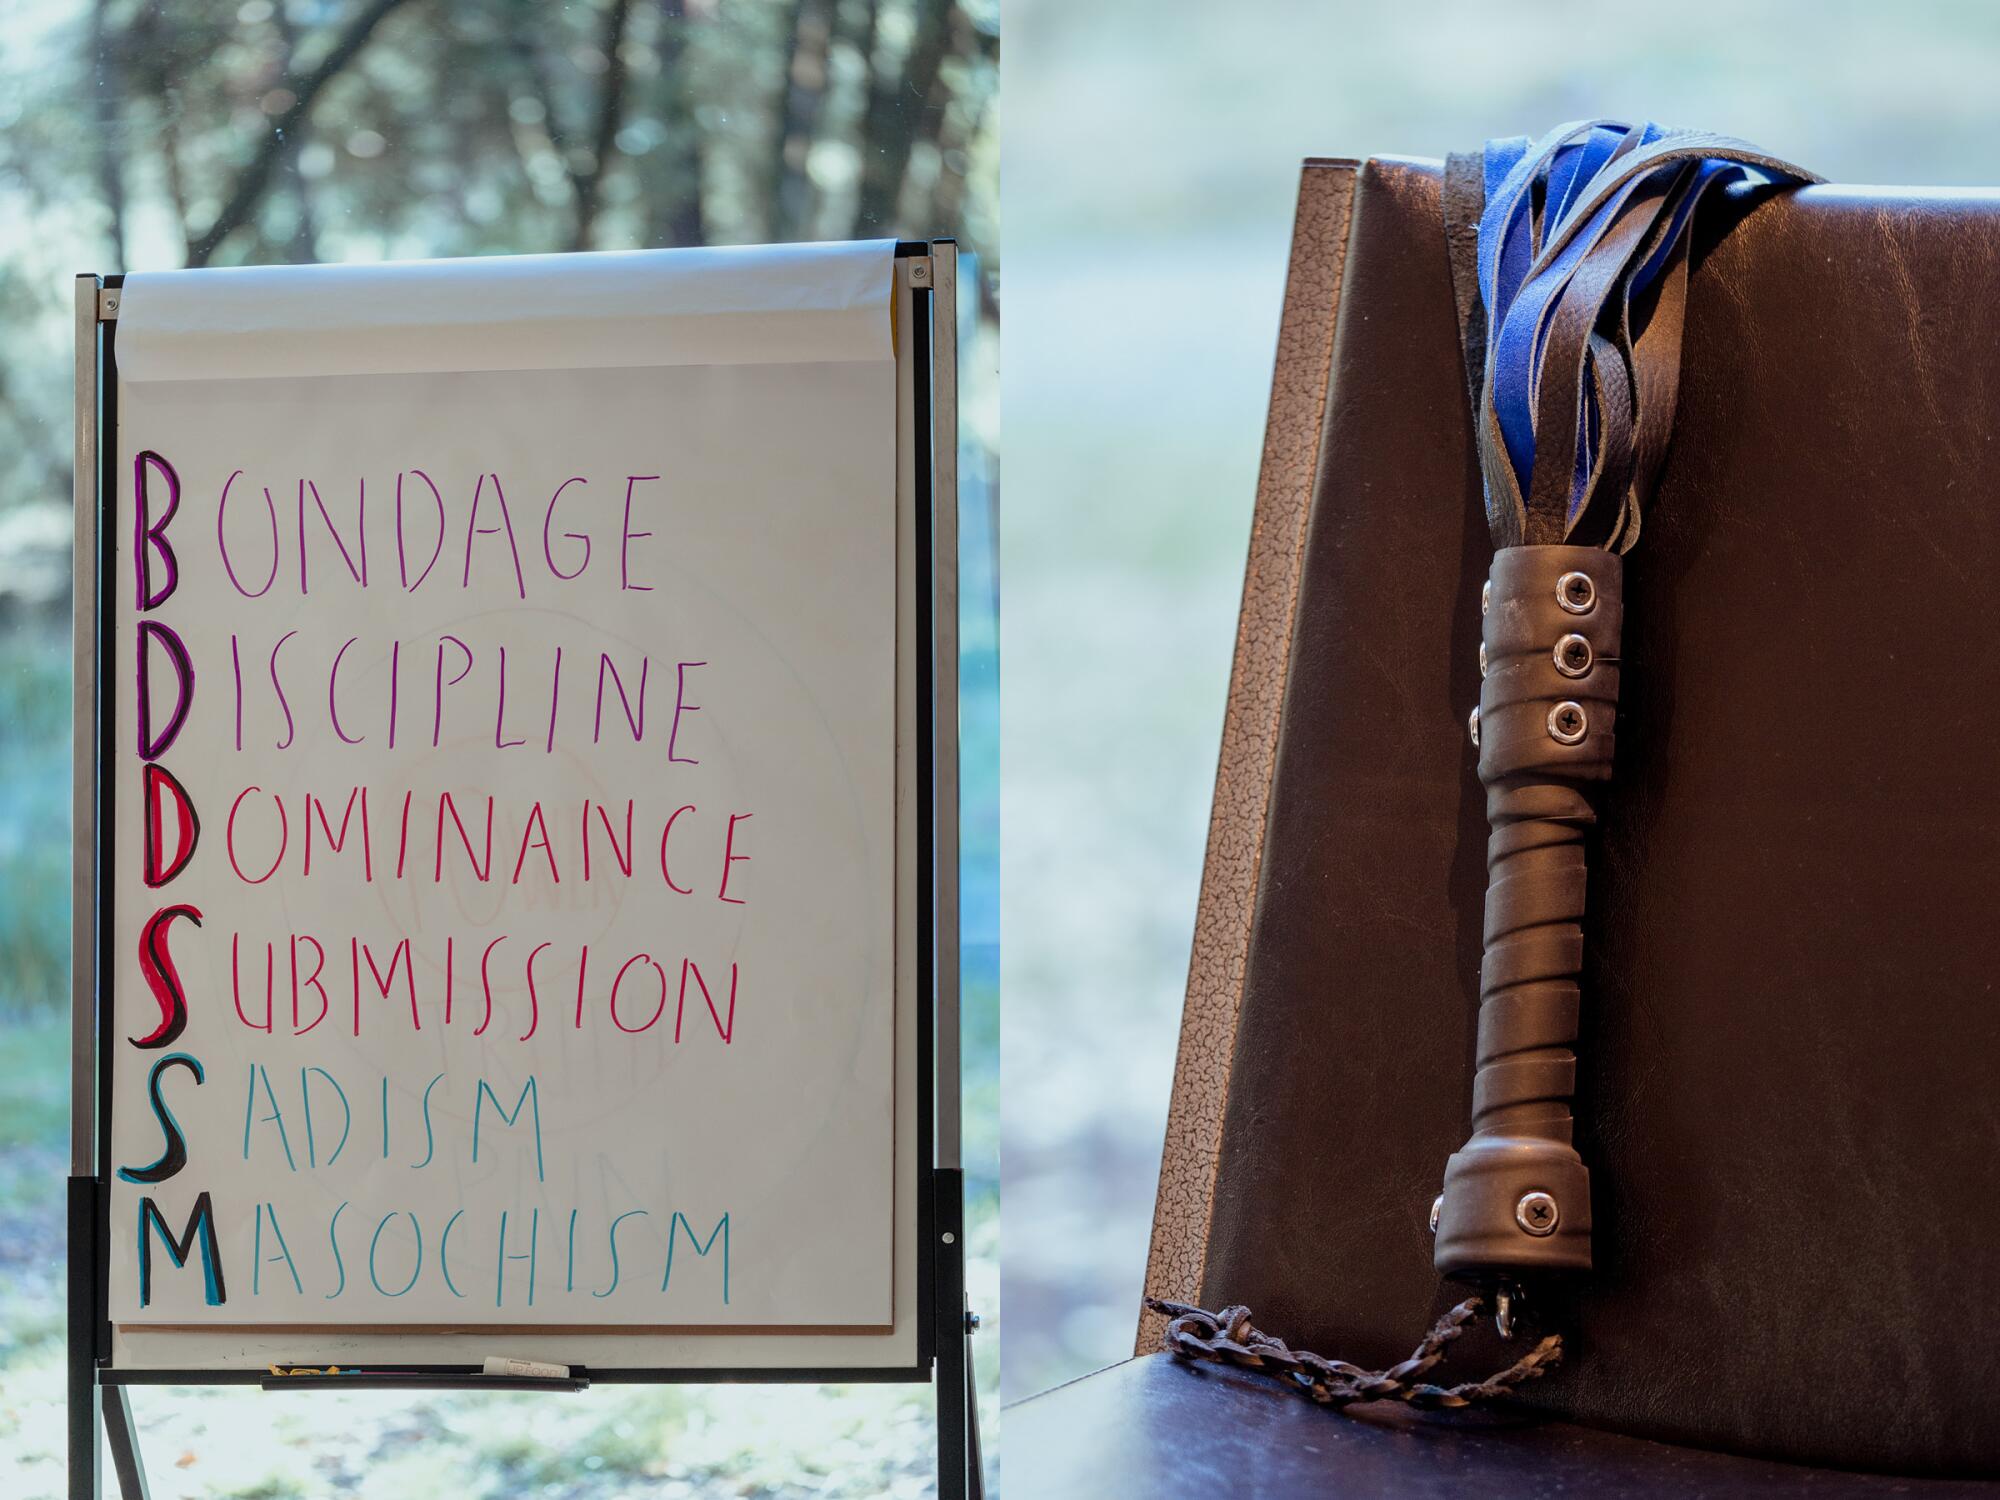 Two images side by side, one of a leather whip, right, and the other of a notebook showing the acronym for BDSM.